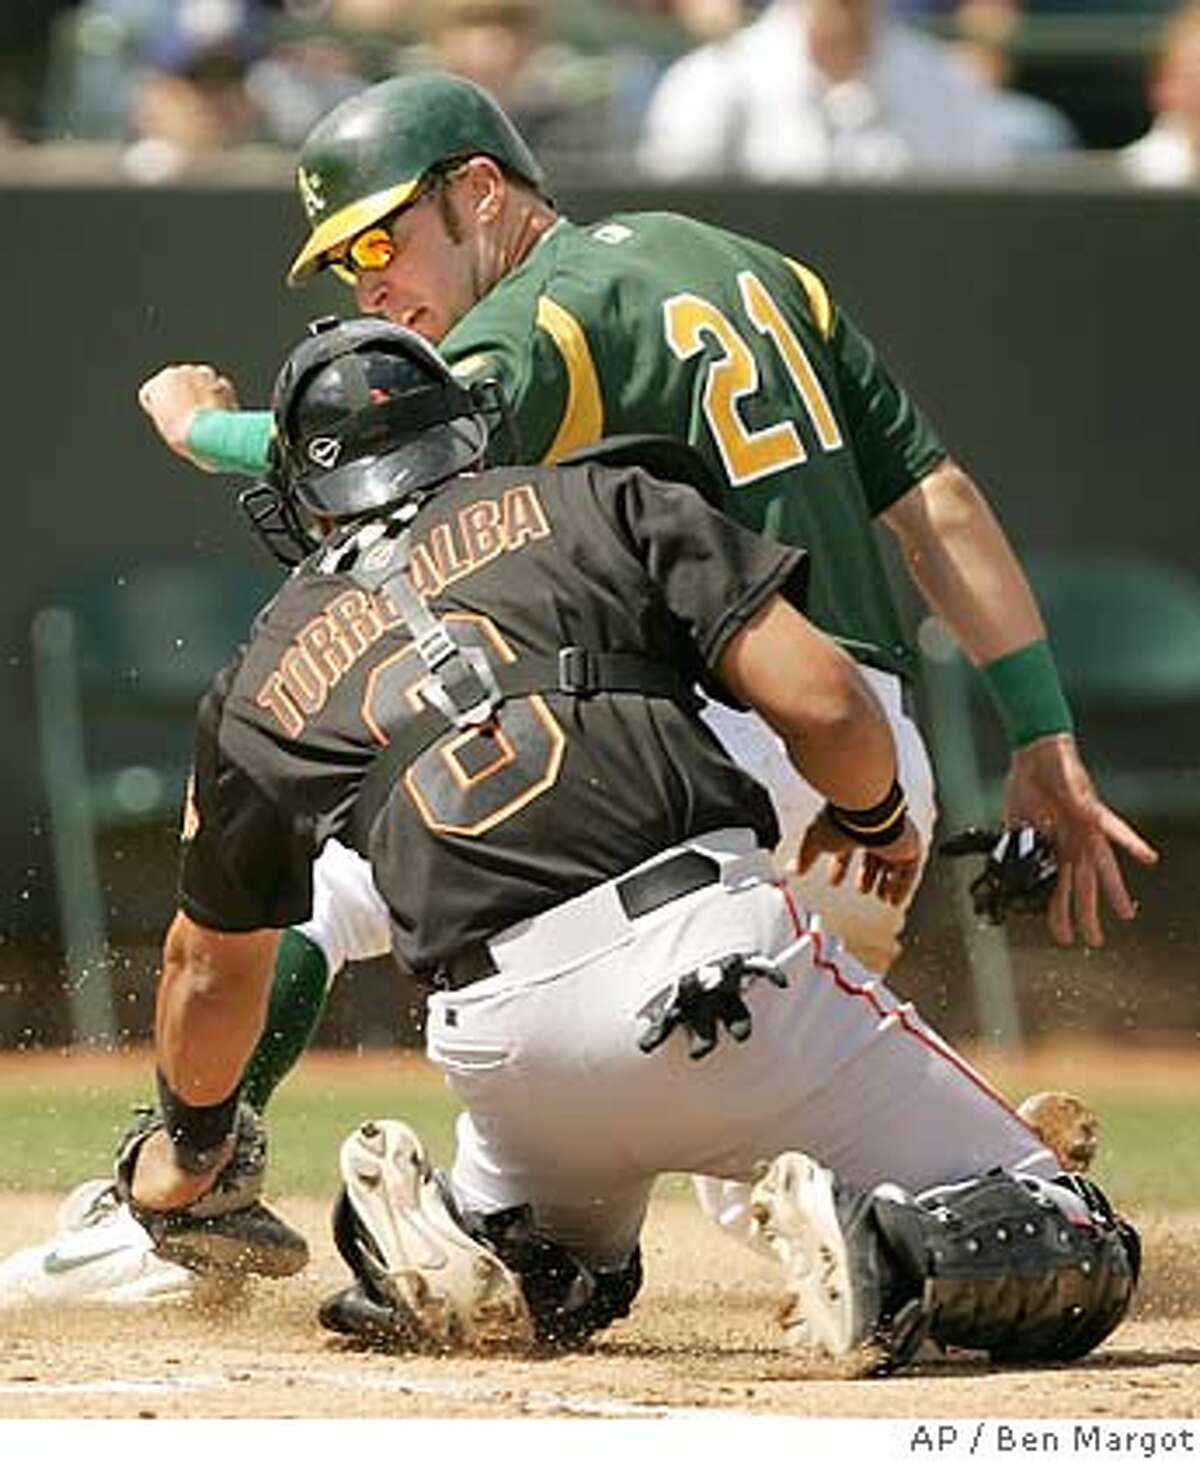 Oakland Athletics' Mark Kotsay (21) beats the tag of San Francisco Giants catcher Yorvit Torrealba to score in the first inning of a spring training game Sunday, March 20, 2005, in Phoenix. Kotsay scored on a single by teammate Erubiel Durazo. (AP Photo/Ben Margot)